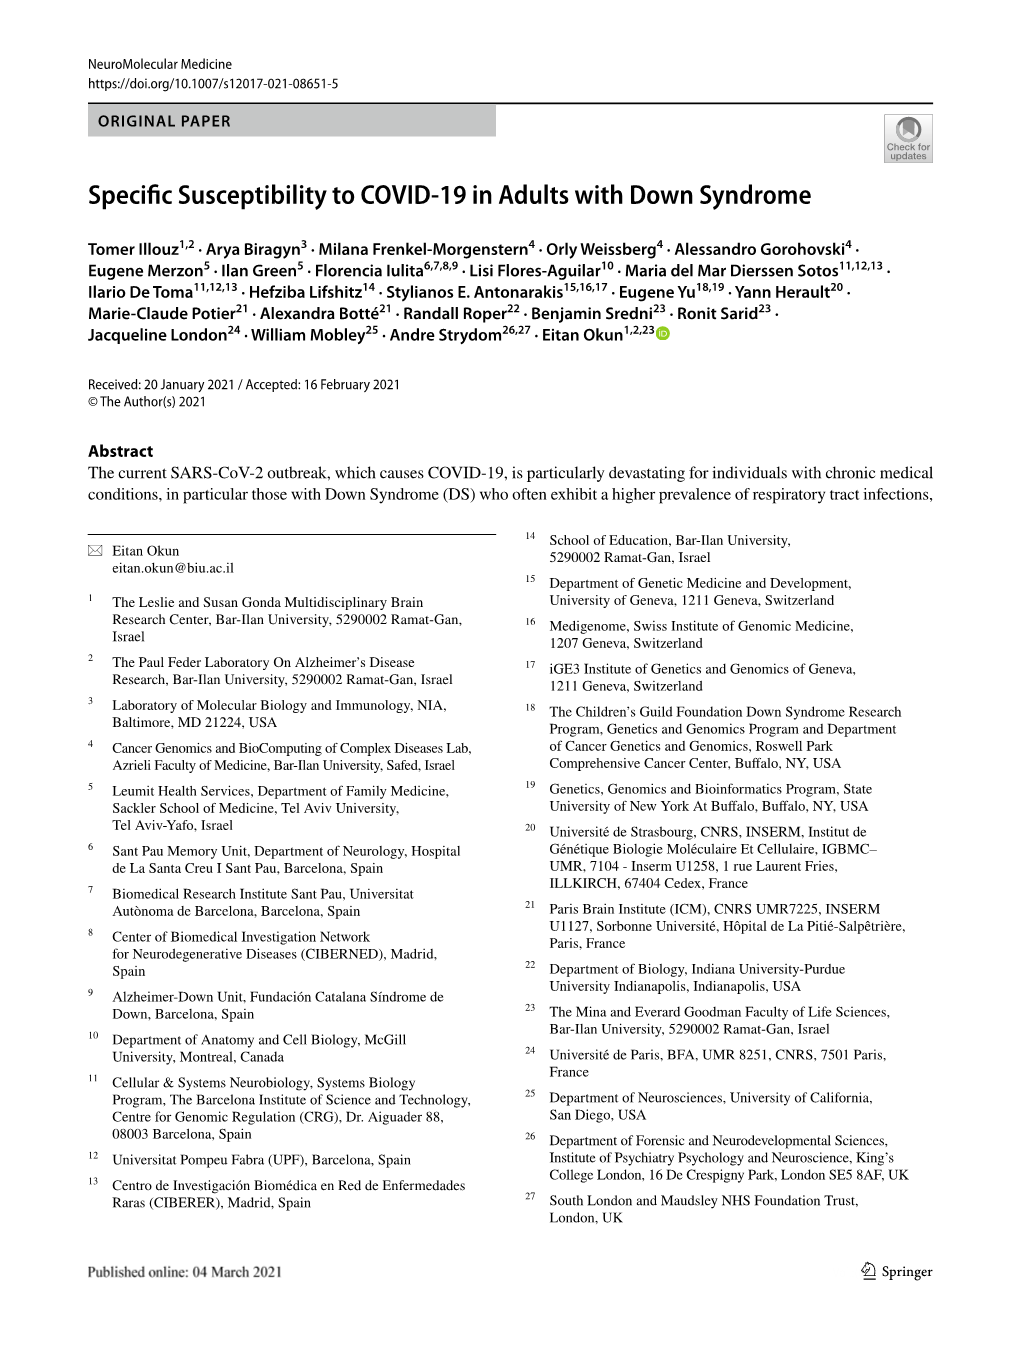 Specific Susceptibility to COVID-19 in Adults with Down Syndrome